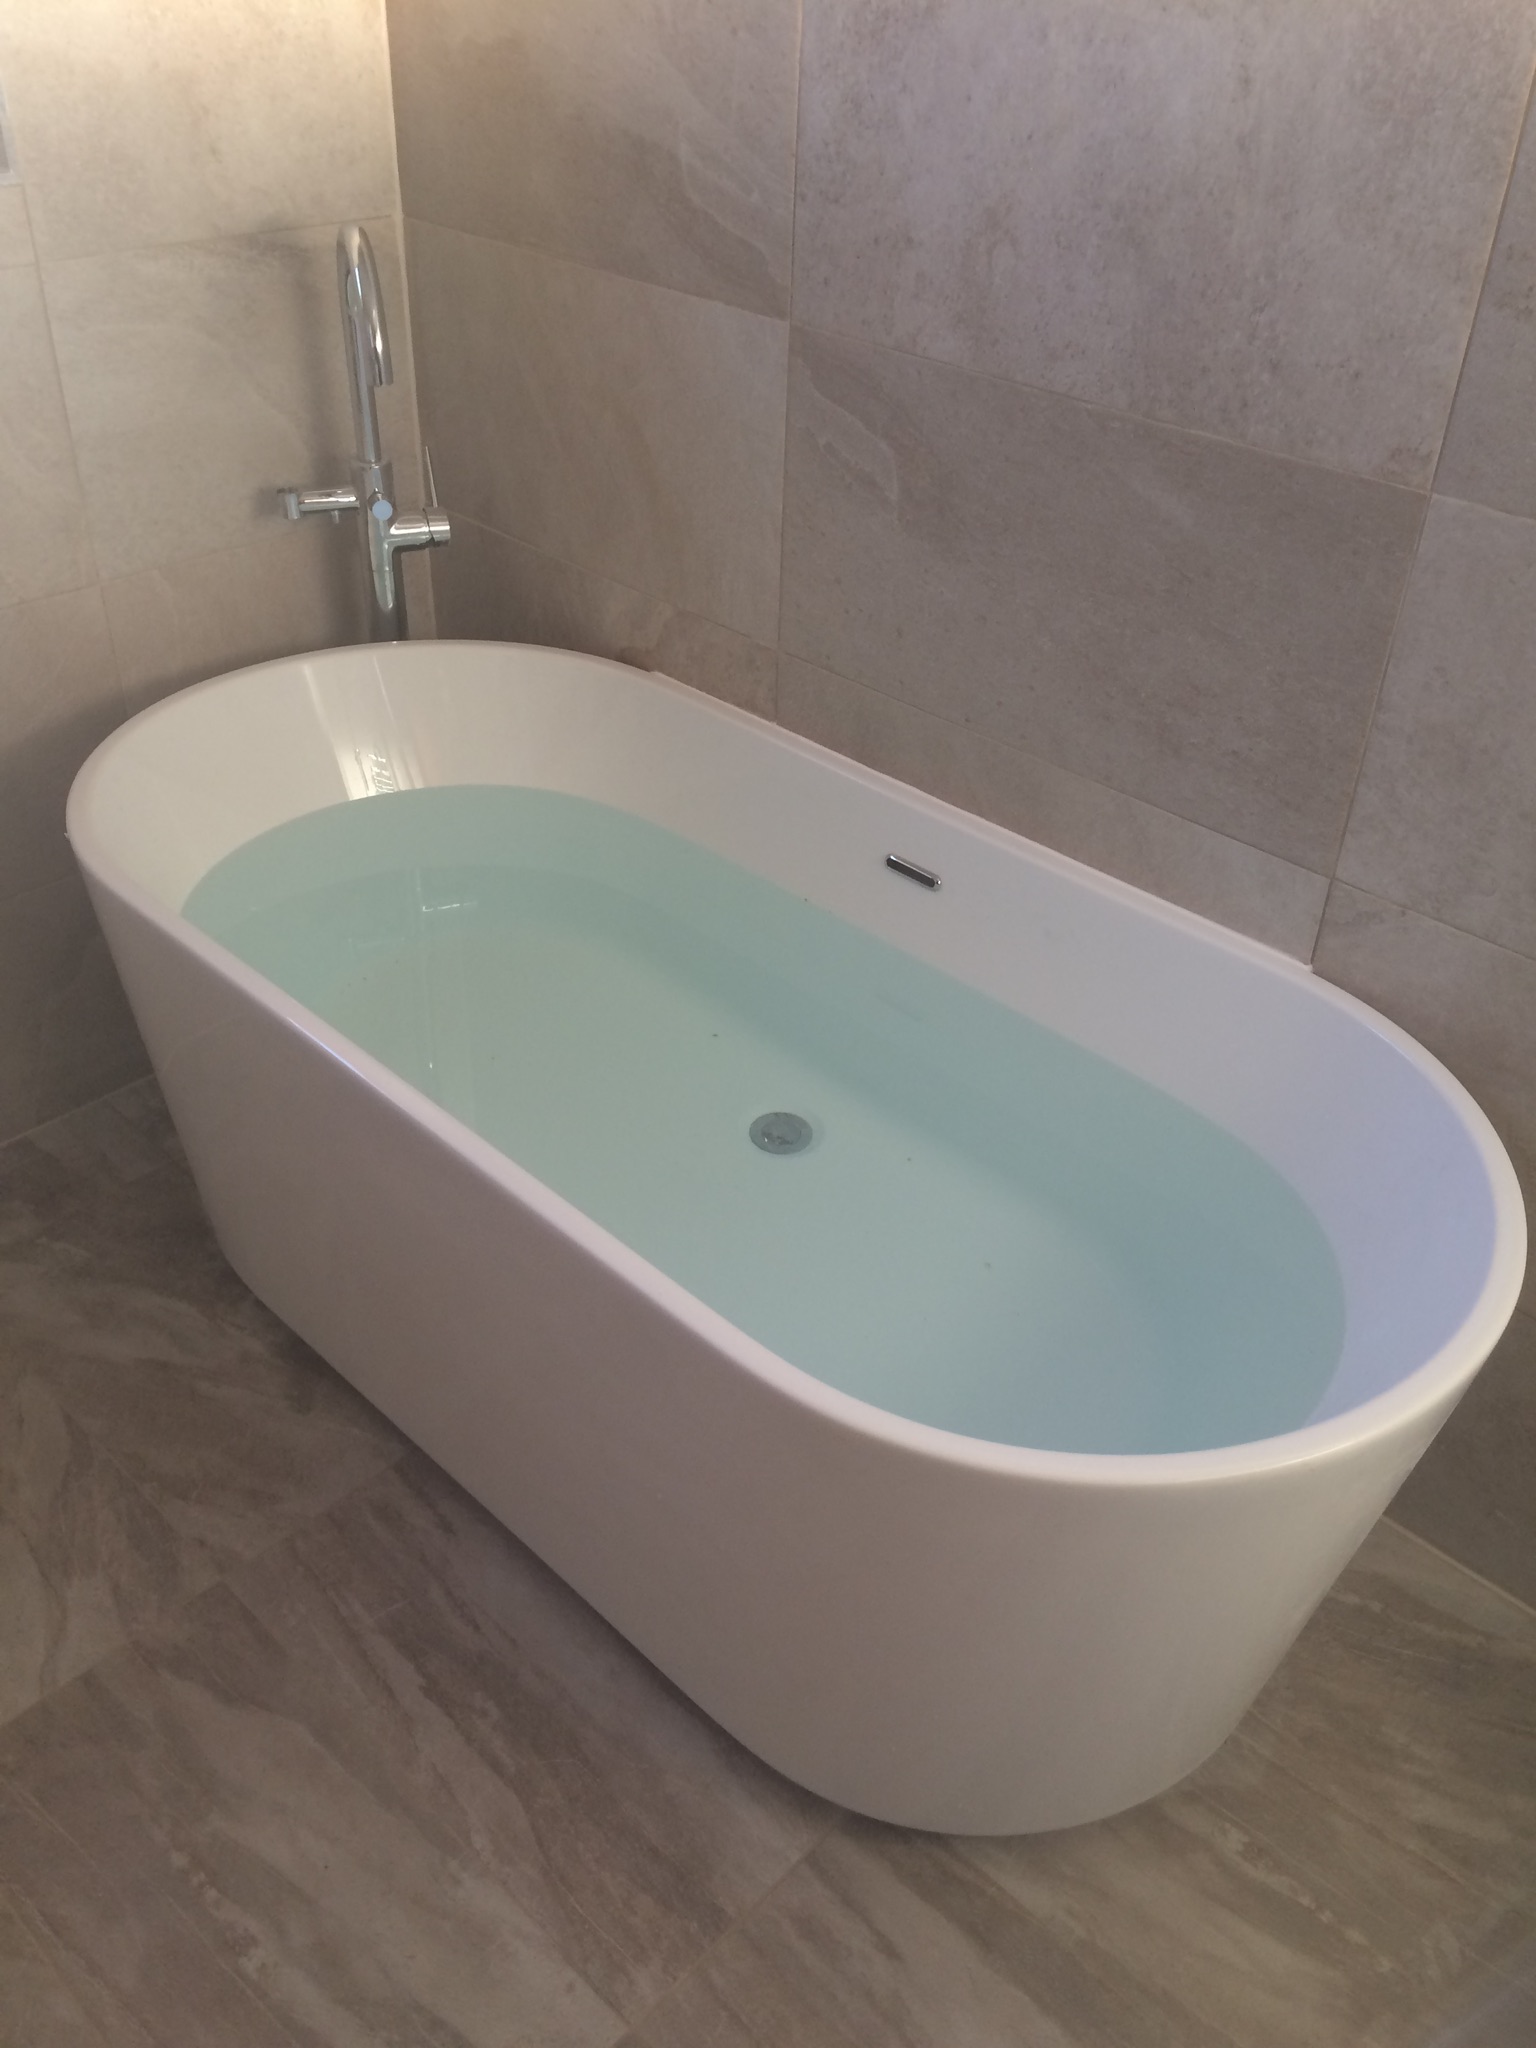 Bathrooms, Showers, Baths, Taps, Fitting, Installation